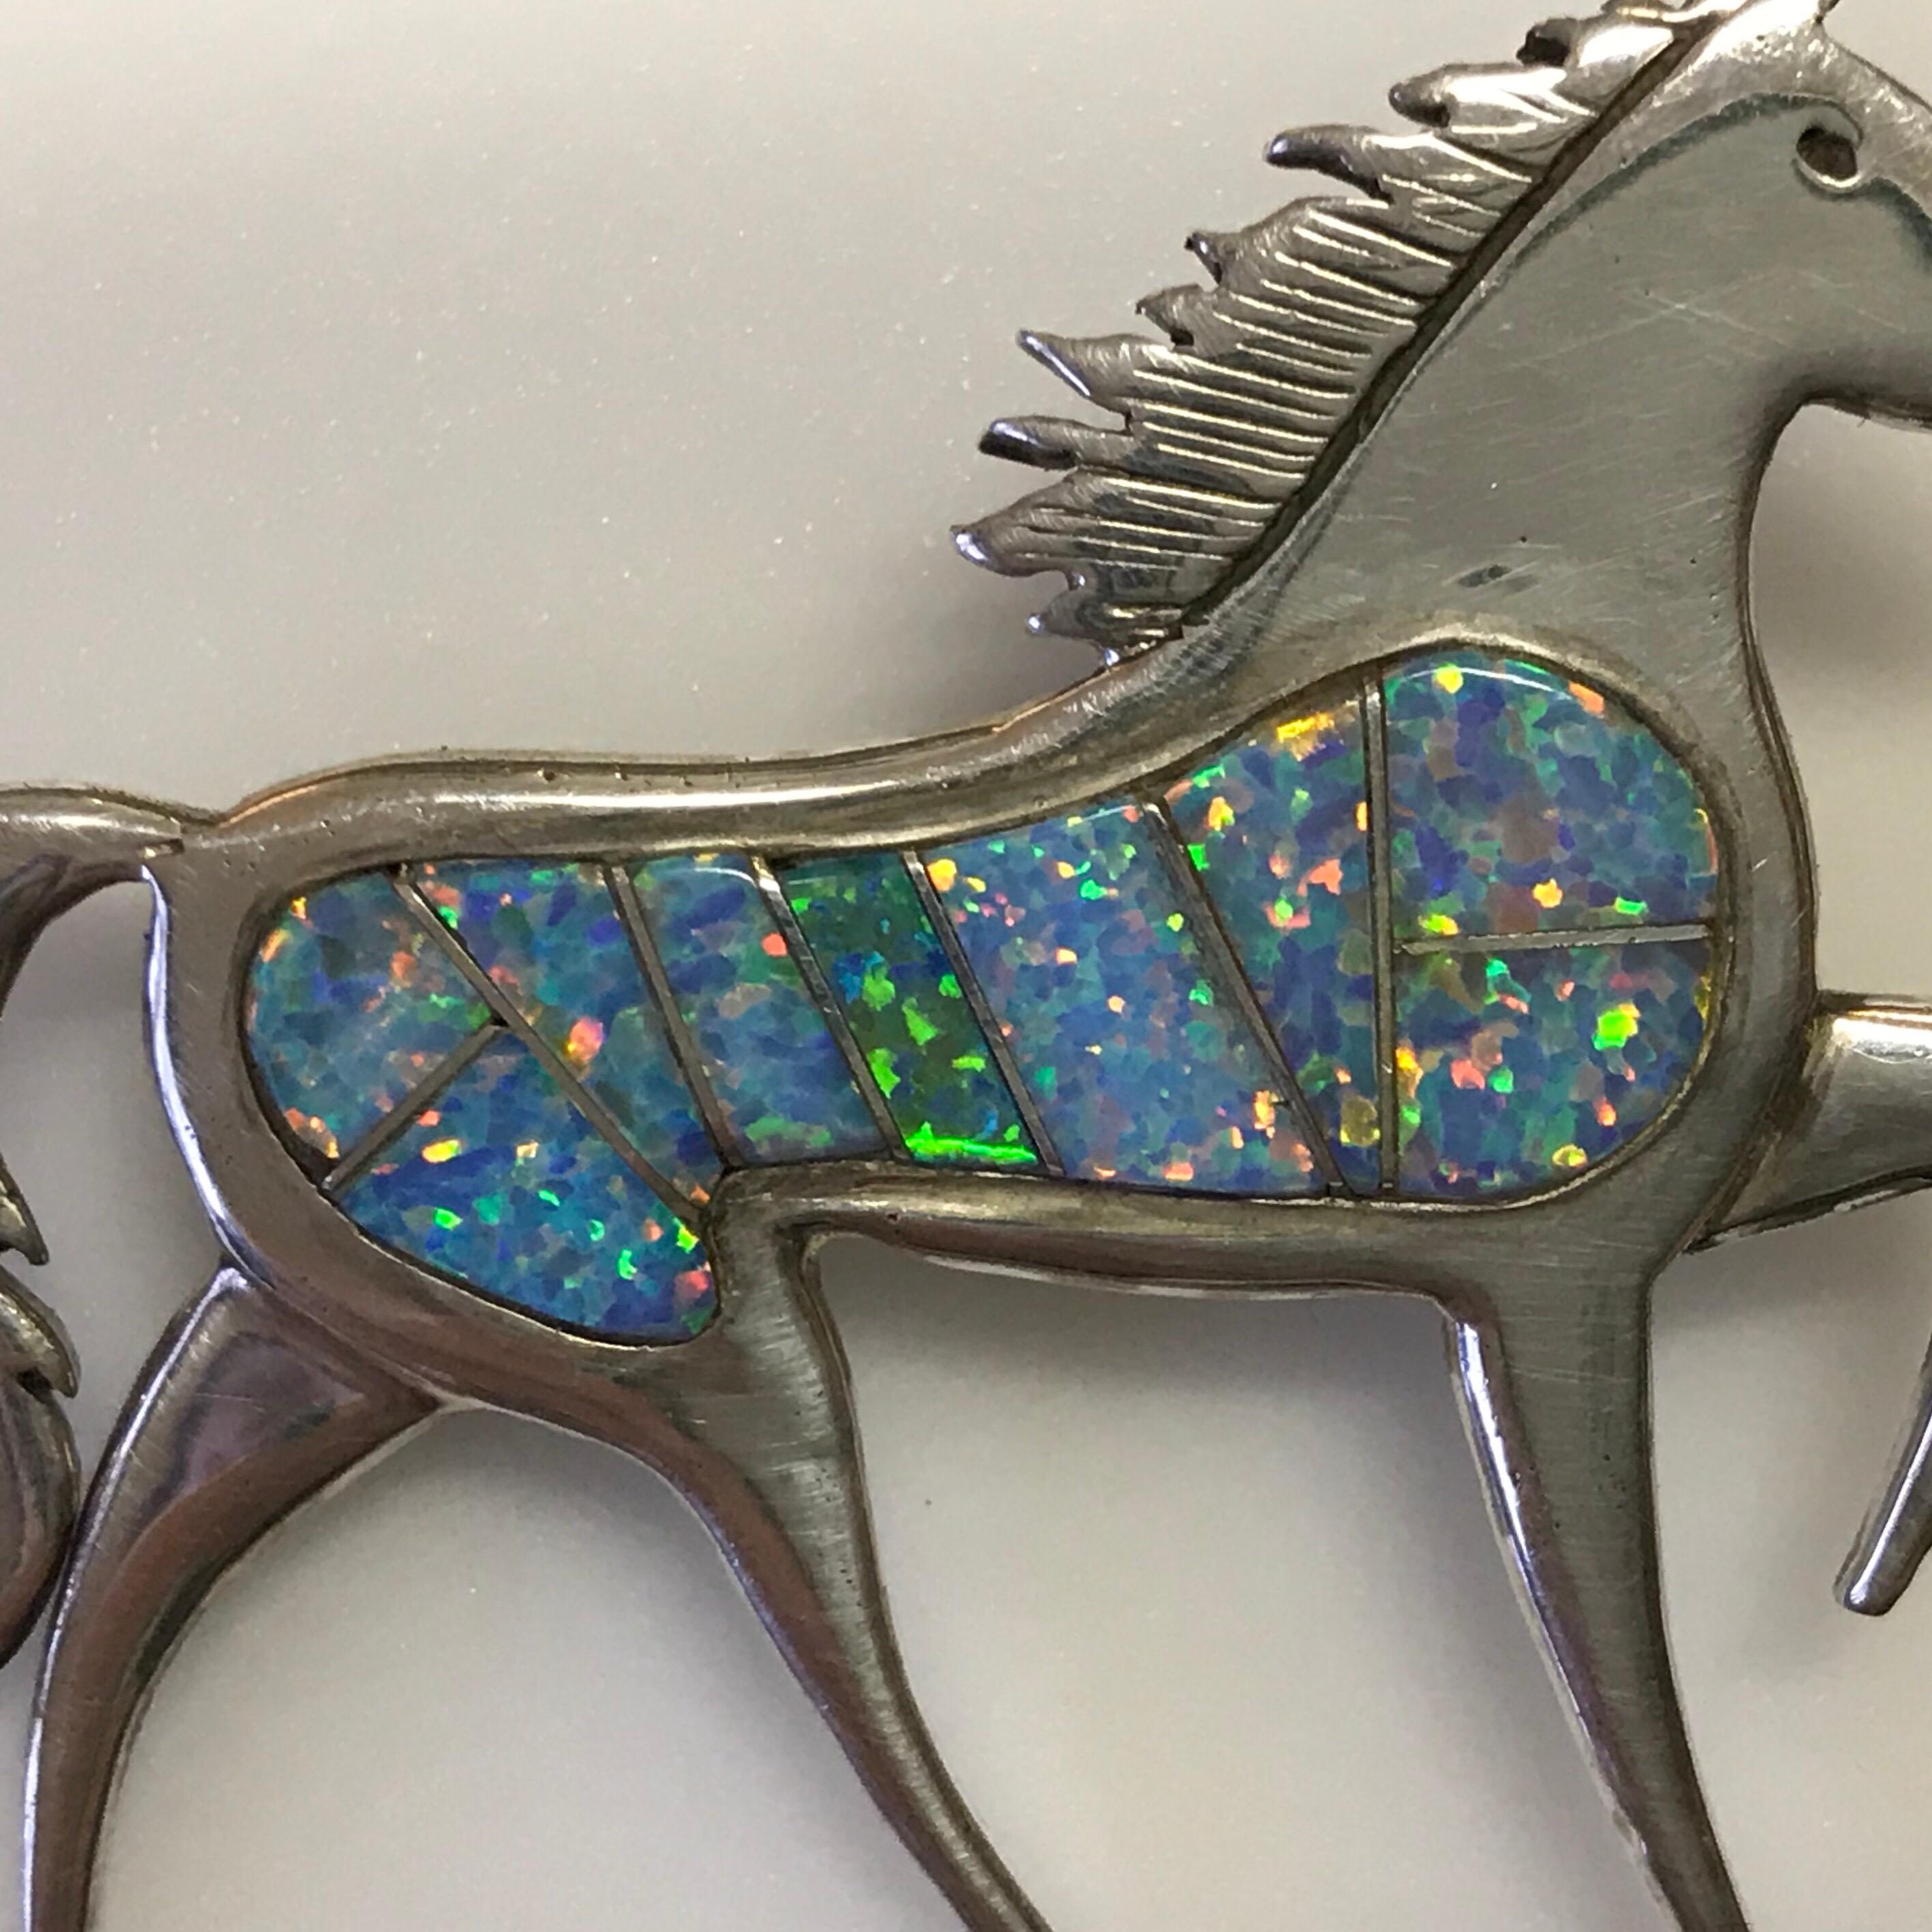 This fire opal mosaic & sterling stallion brooch is a designer original by an American Navajo Indian artist, Calvin Begay. He is known for creating 